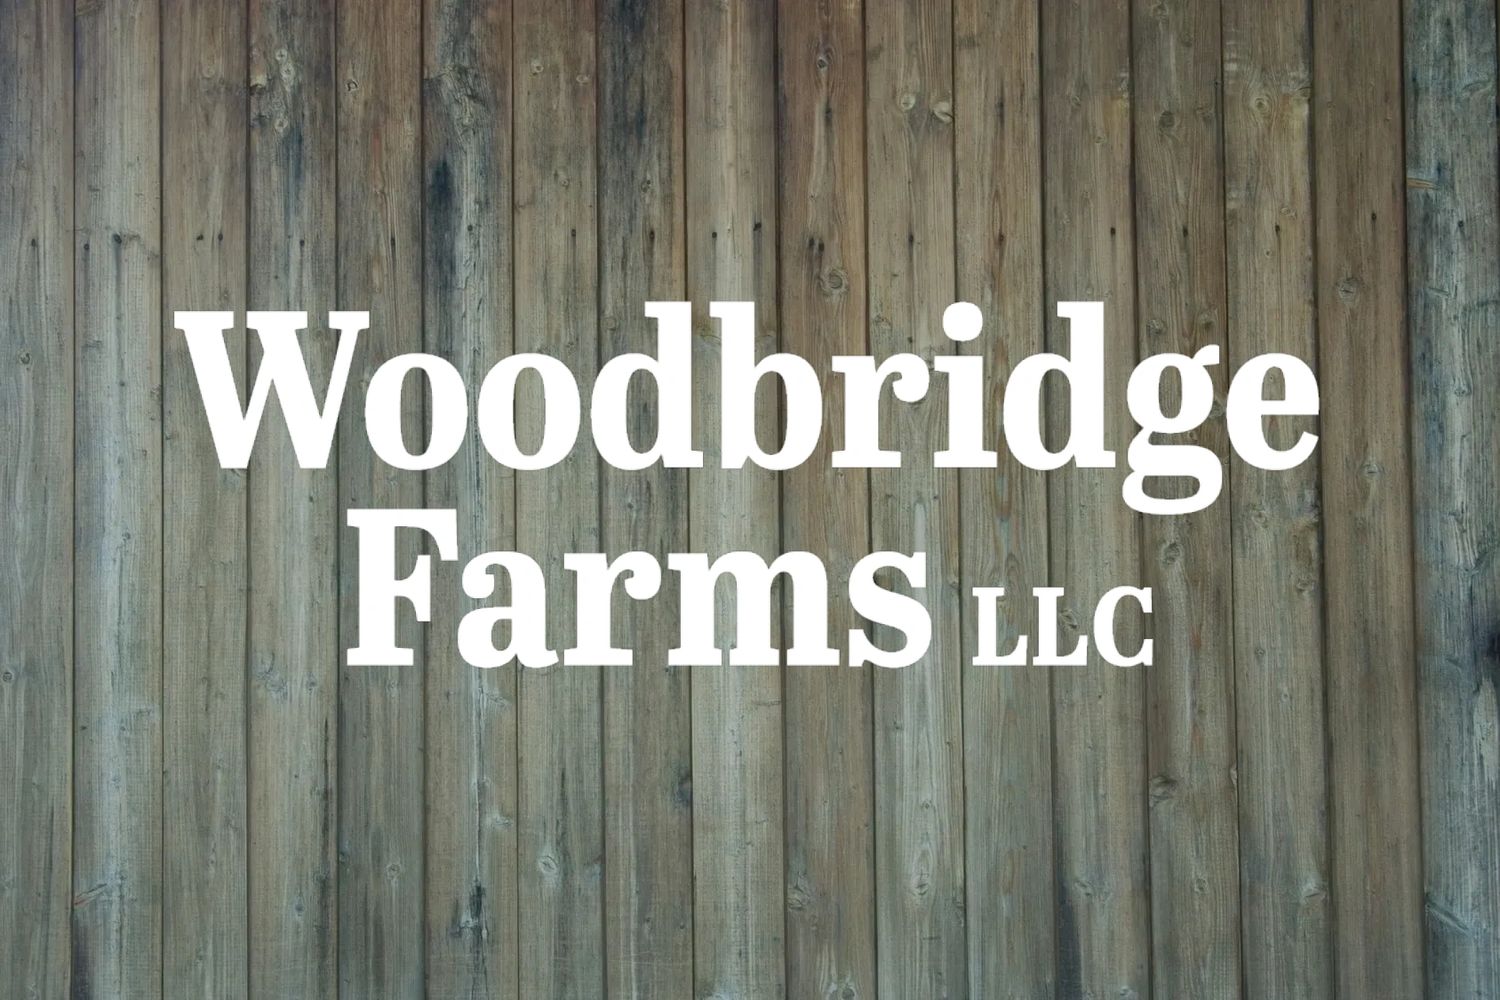 Woodbridge Farms. Seller of organic nuts and trail mixes